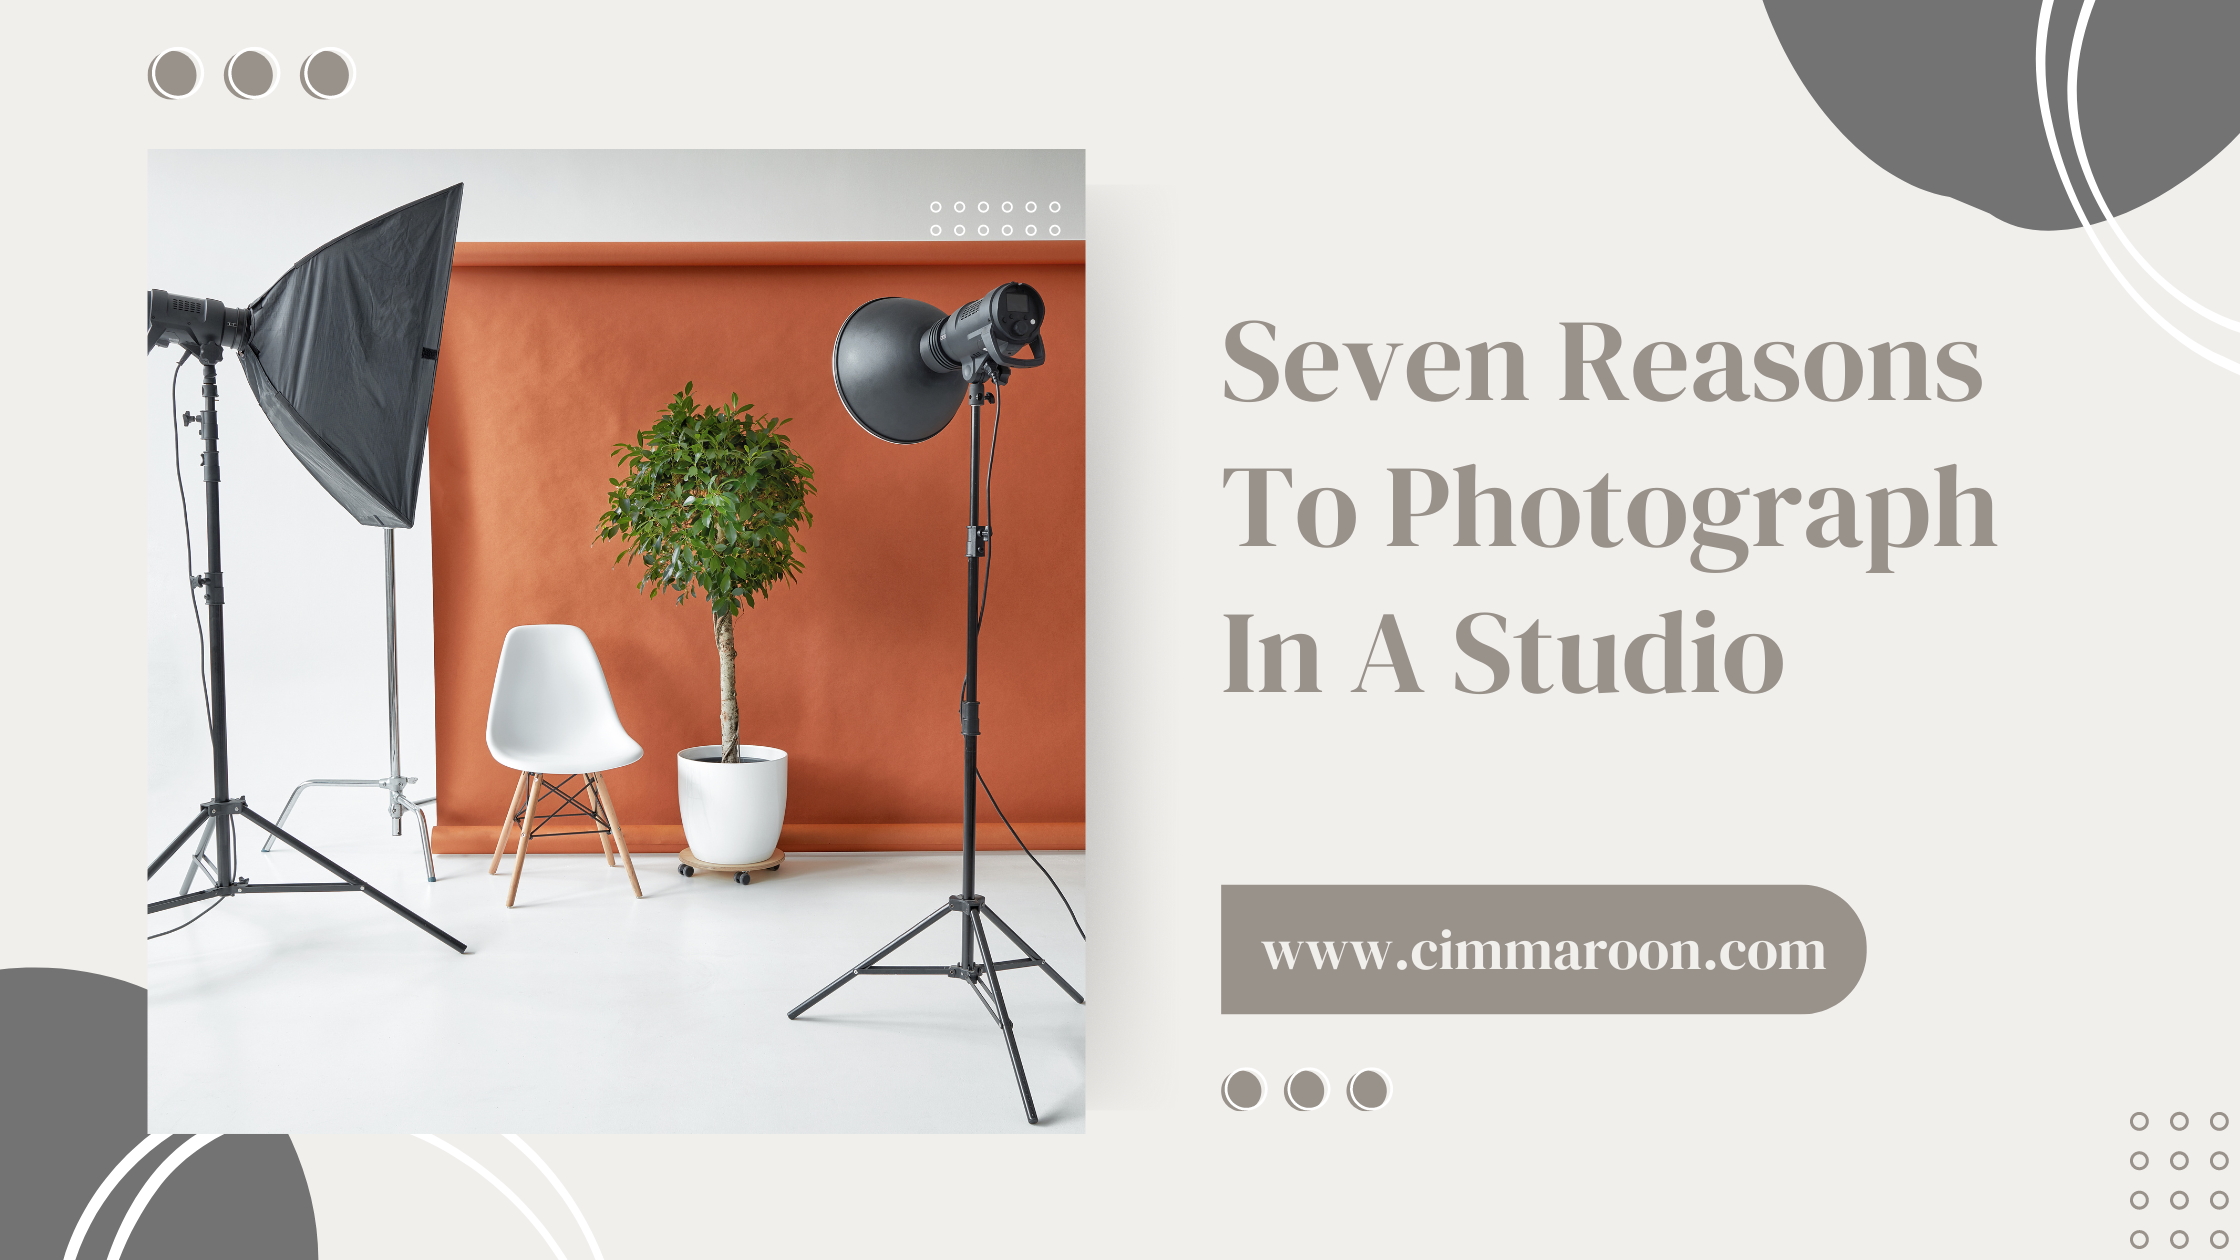 Seven Reasons to Photograph in a Studio